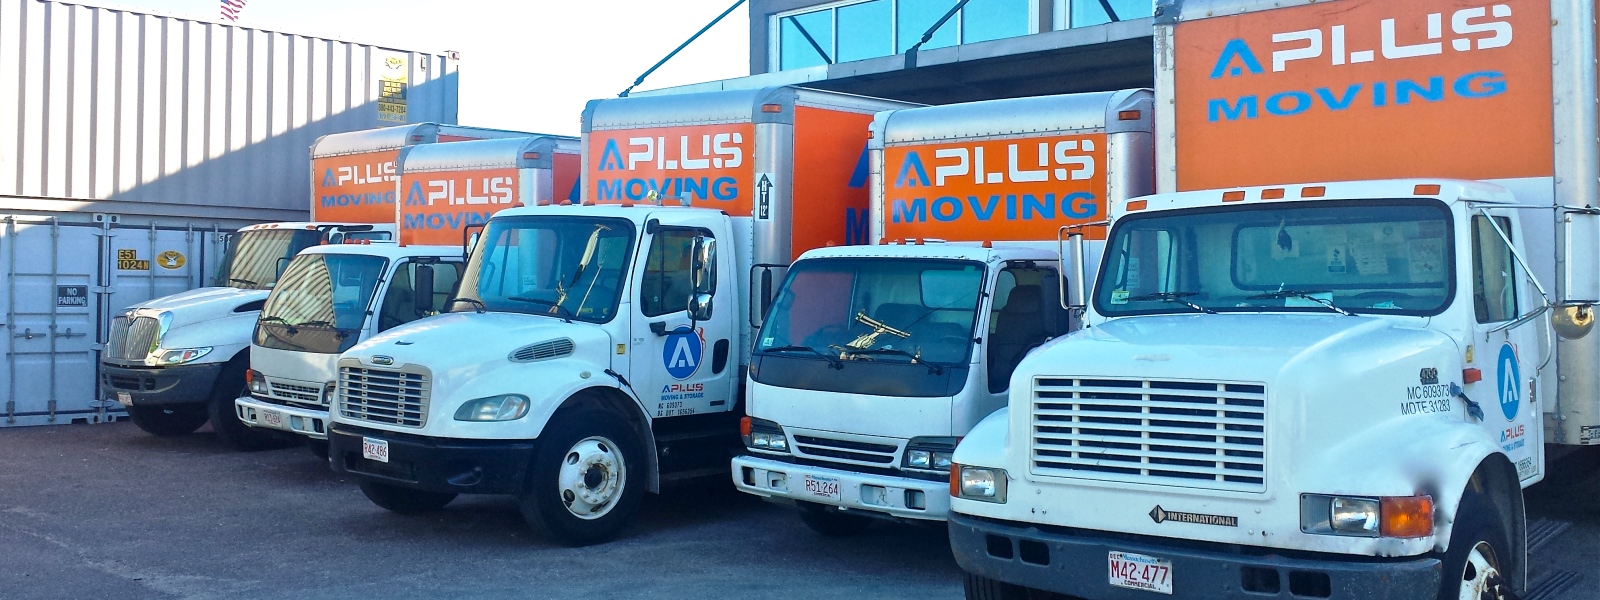 A-Plus Moving & Storage - First Class Boston Movers - Make Your Move Hassle Free